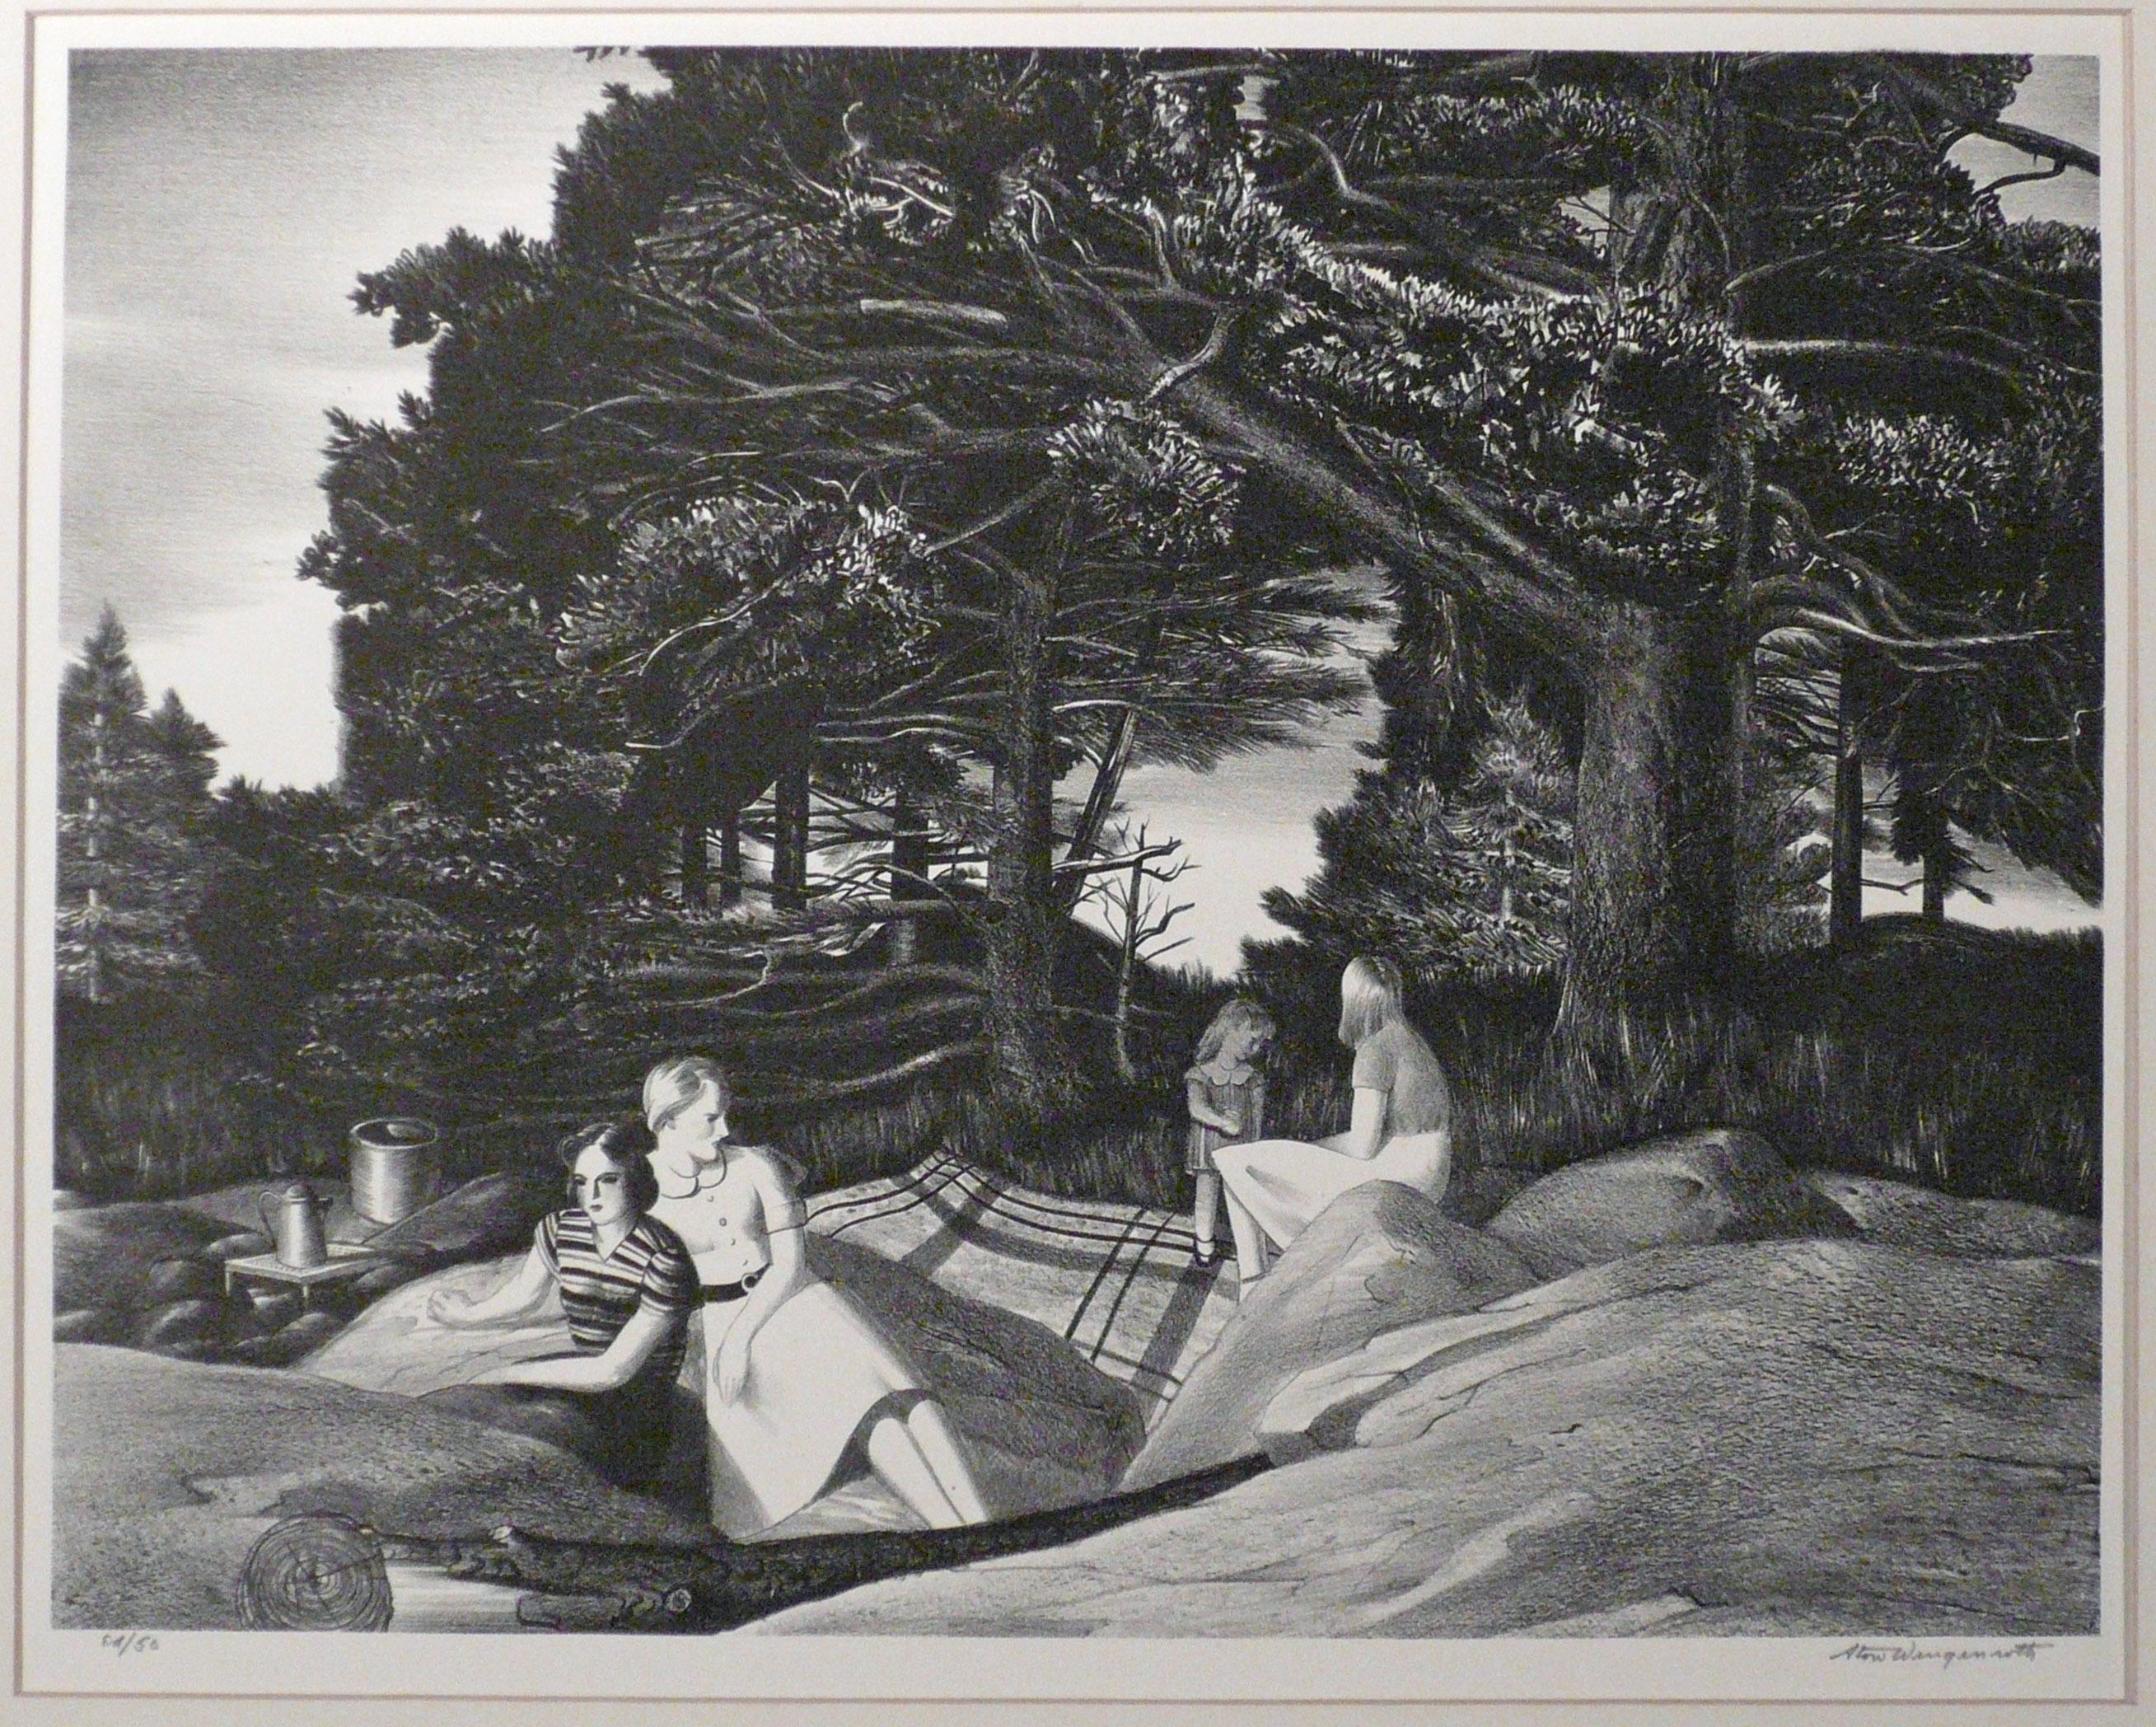 Stow Wengenroth Figurative Print - PICNIC - PORT CLYDE, MAINE